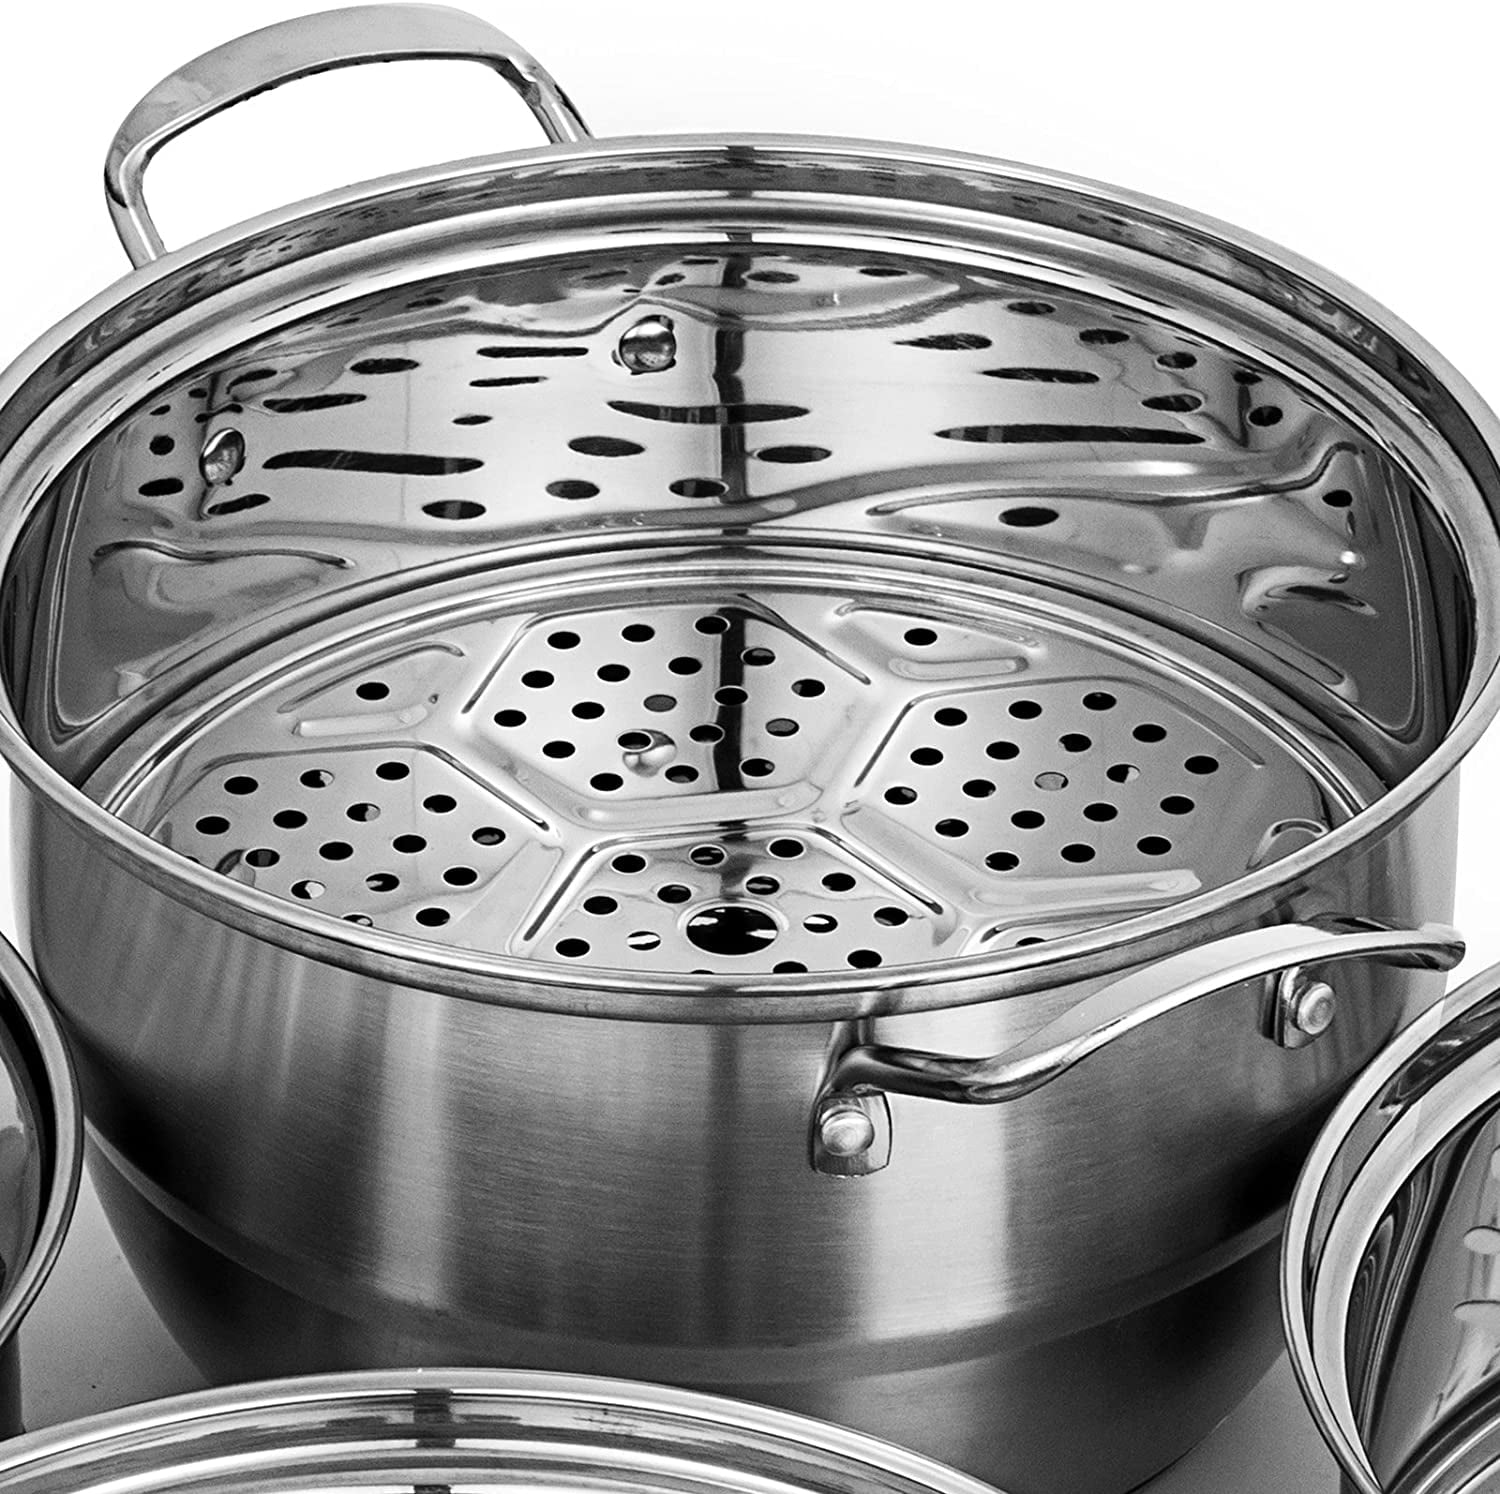 HZIB 1.5 Quart Stainless Steel Pot, Vegetable Steamer for induction stove,  Small Steamer Pot Tri-ply, Steamer Pot with Holes Lid, Small Saucepan for